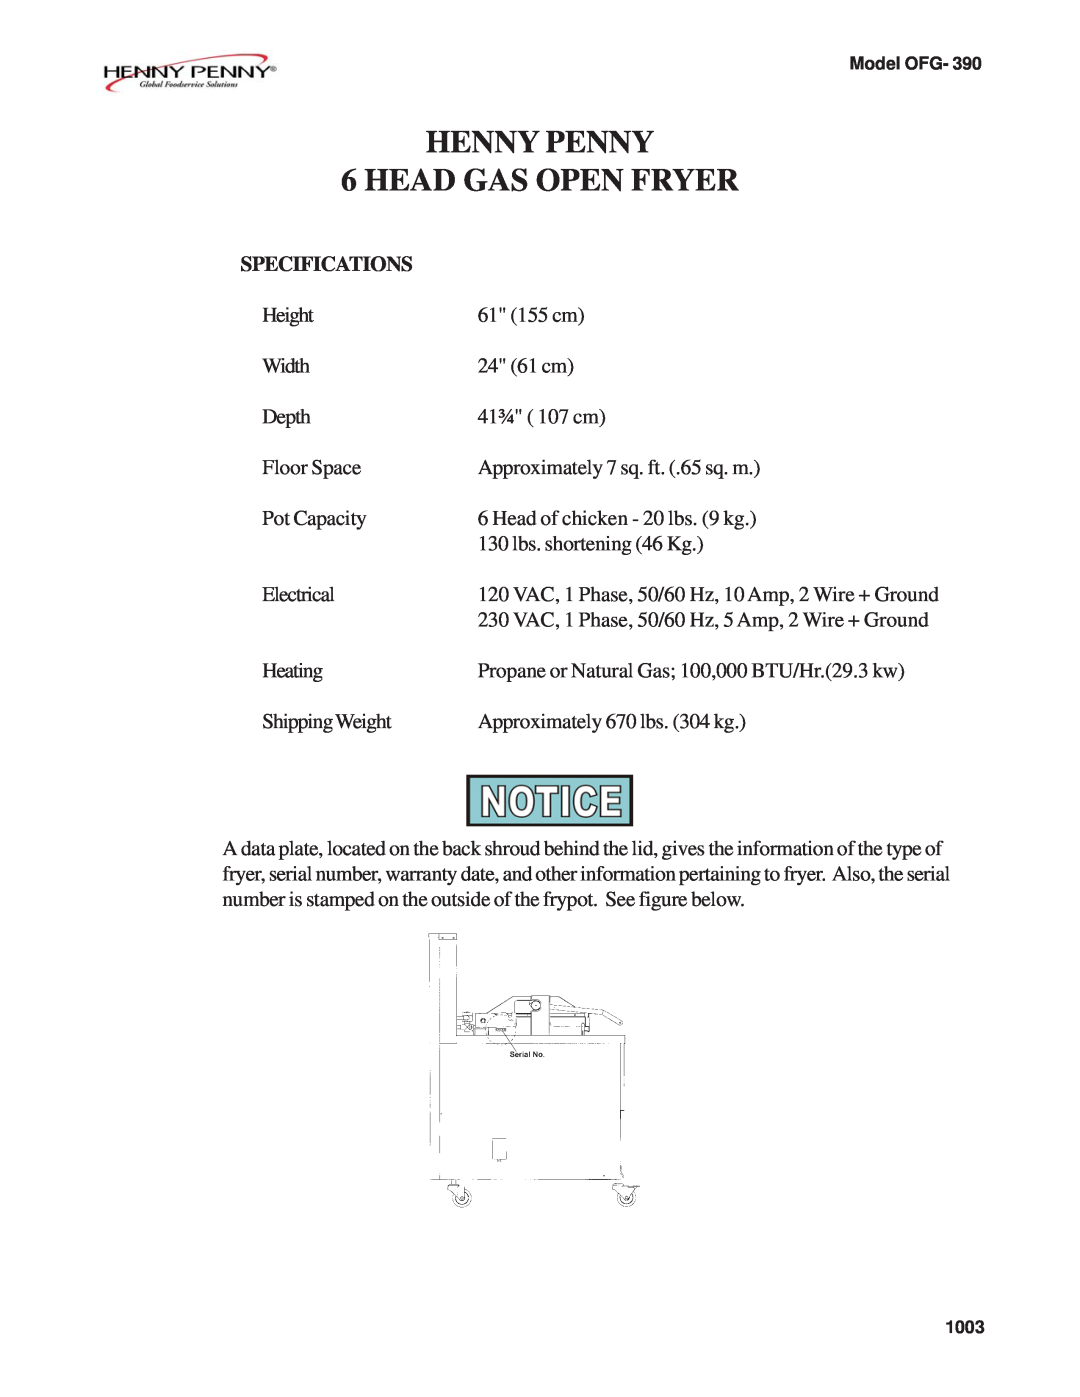 Henny Penny OFG-392 technical manual Specifications, HENNY PENNY 6 HEAD GAS OPEN FRYER 